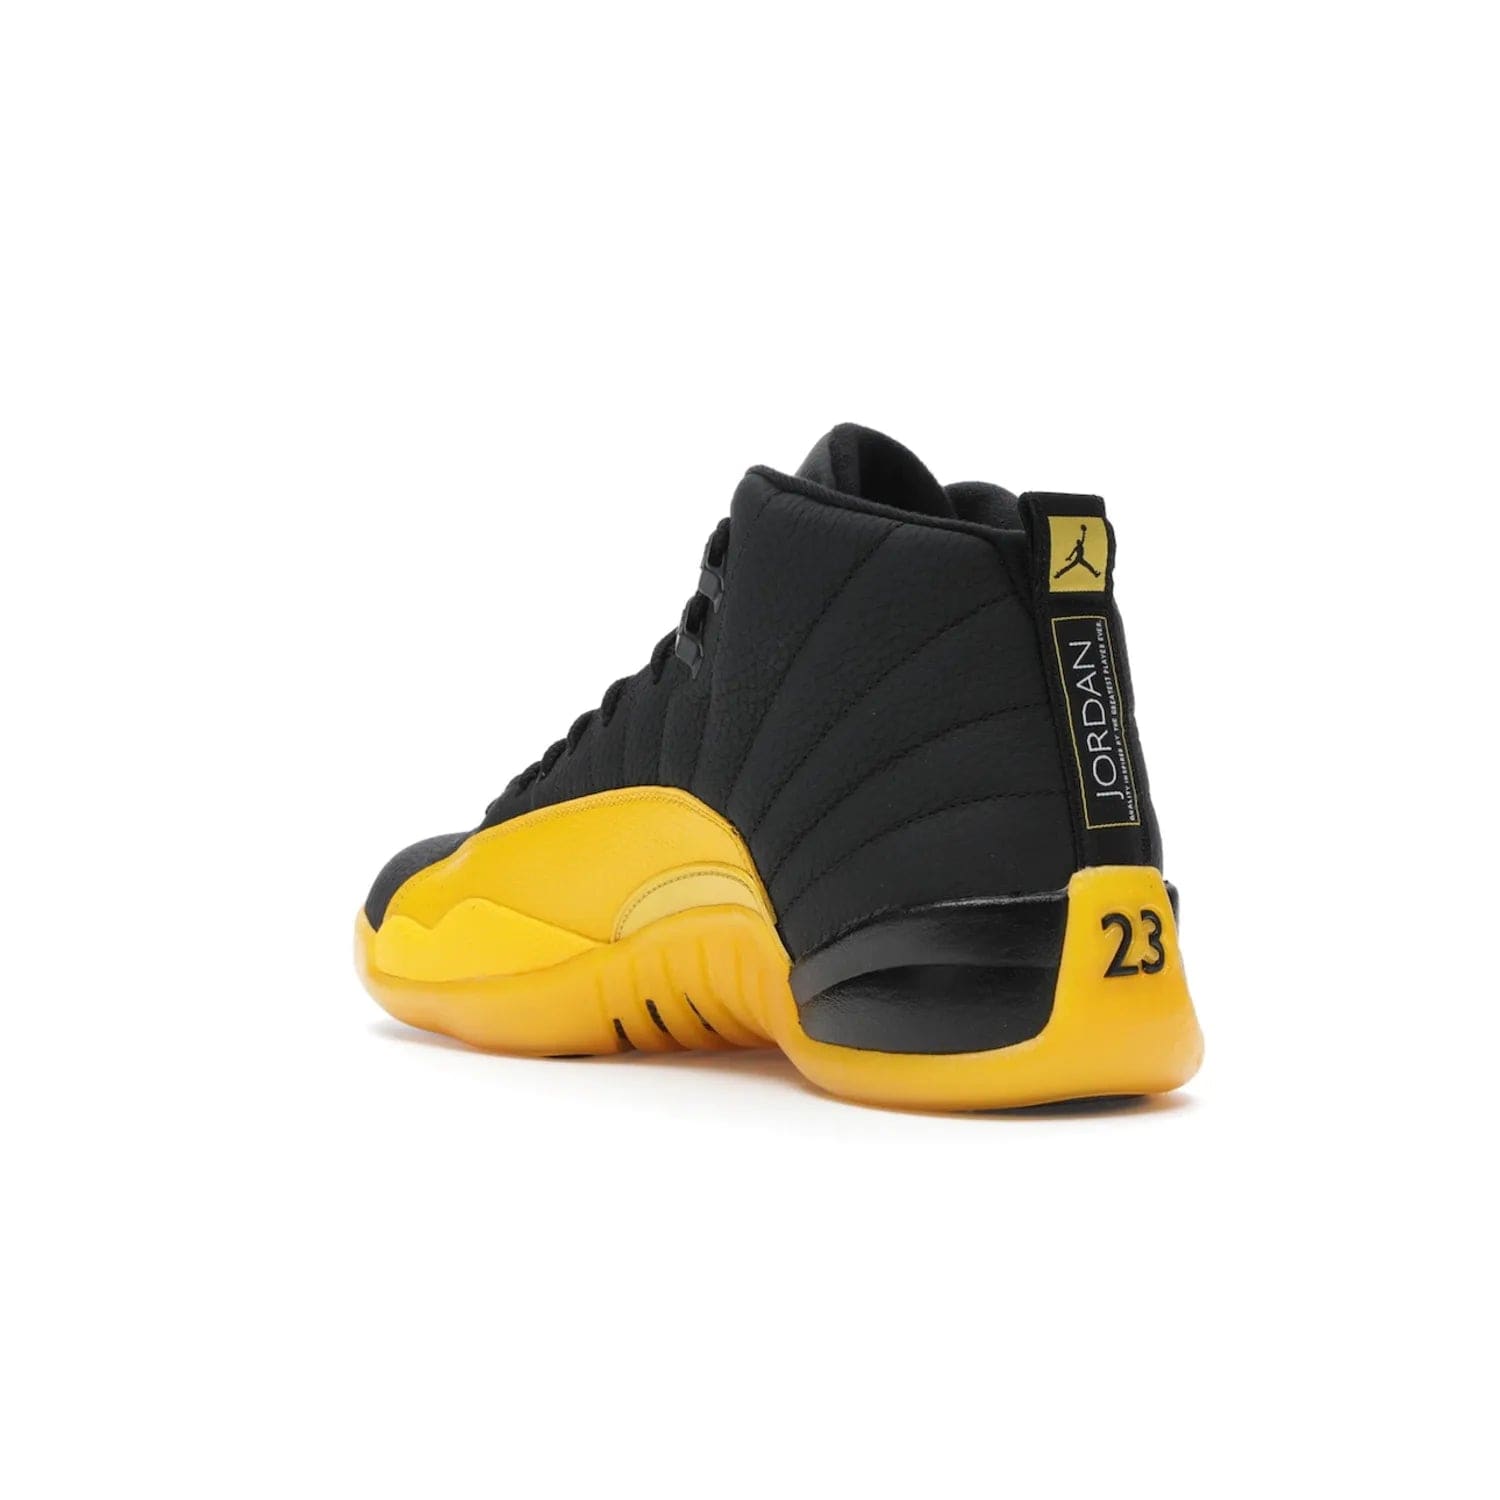 Jordan 12 Retro Black University Gold - Image 24 - Only at www.BallersClubKickz.com - This Jordan 12 Retro features a black tumbled leather upper and University Gold accents for a modern twist. Boasting Jordan "Two Three" branding and a yellow sole, these shoes will elevate your wardrobe. Fresh, sleek, and one of a kind - the Jordan 12 University Gold is your summer sneaker.